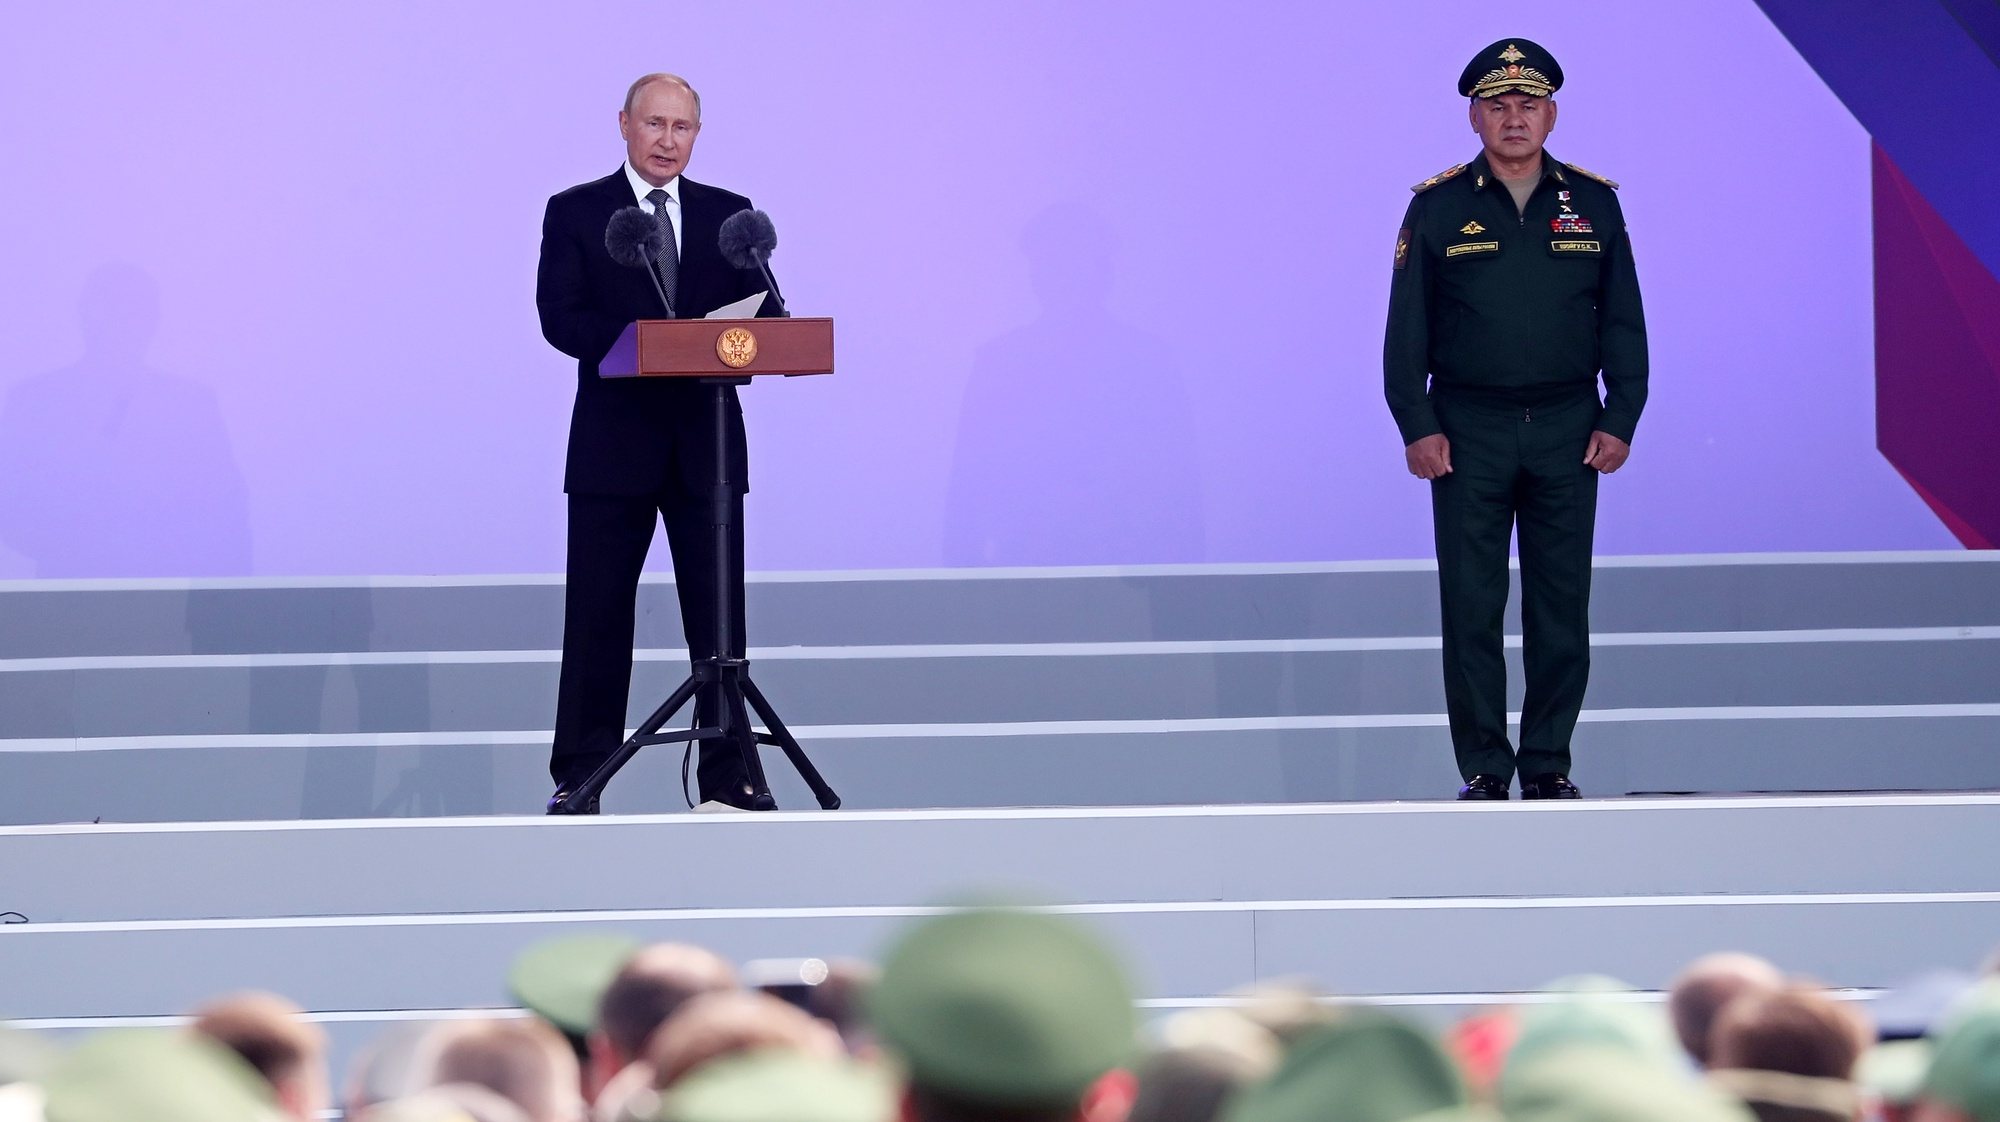 epa10122392 Russian President Vladimir Putin (L) and Defence Minister Sergei Shoigu (R) attend the opening ceremony of the the International Military-Technical Forum Army-2022 held at Patriot Park in Kubinka, outside Moscow, Russia, 15 August 2022. The 7th International Military-Technical Forum Army-2021 is held from 15 to 21 August 2022 at Patriot Expo, Kubinka Air Base and Alabino military training grounds.  EPA/MAXIM SHIPENKOV